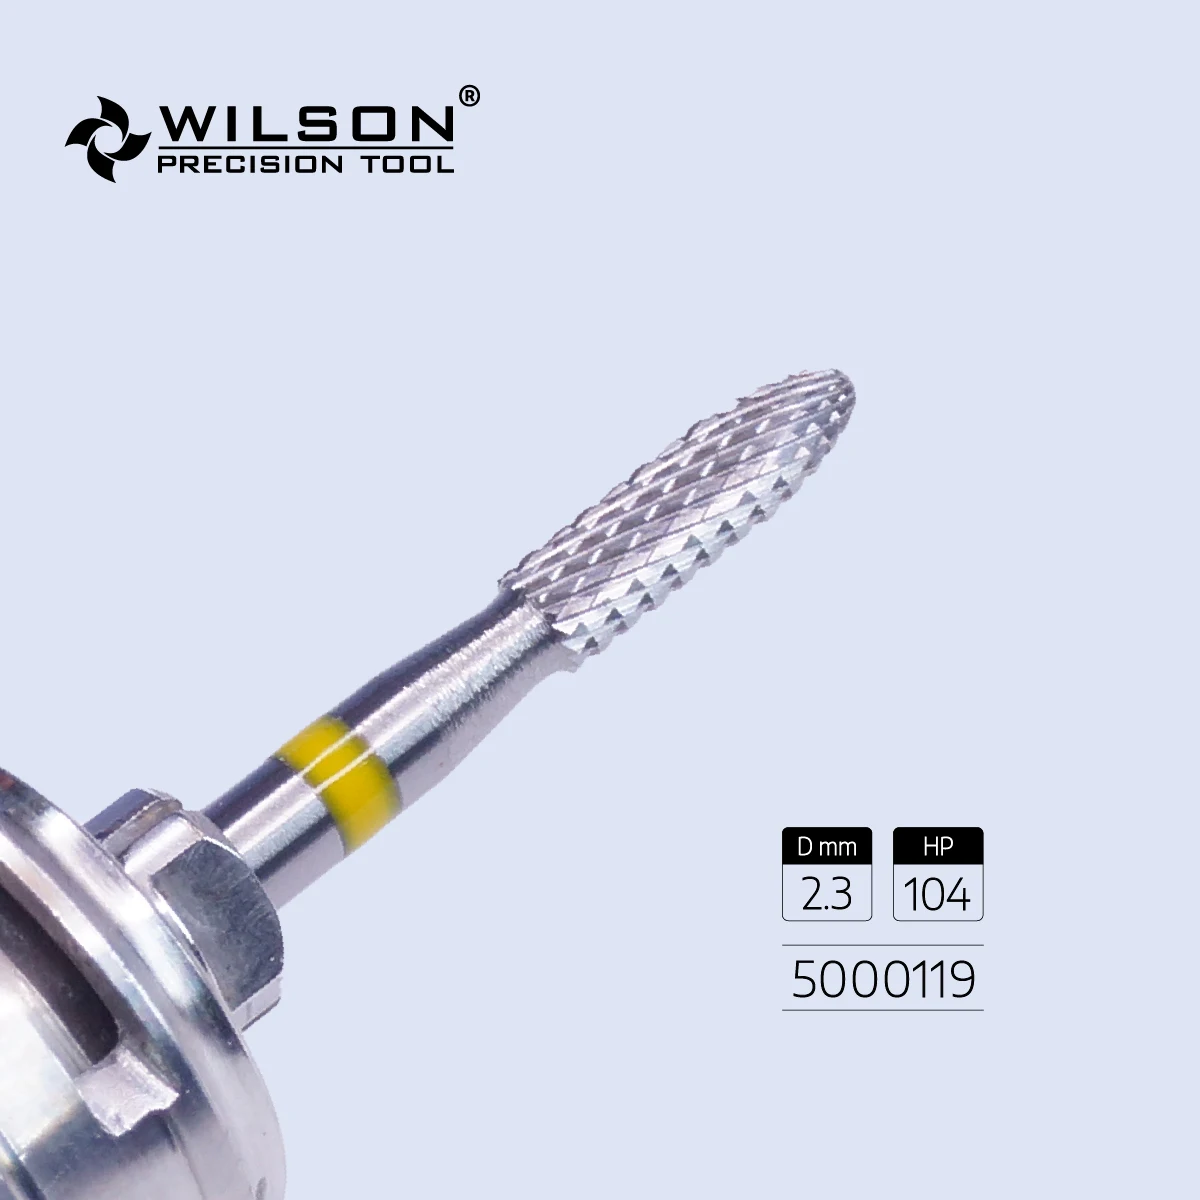 

WILSON PRECISION TOOL 5000119-ISO 289 110 023 Tungsten Carbide Burs For Trimming Metal